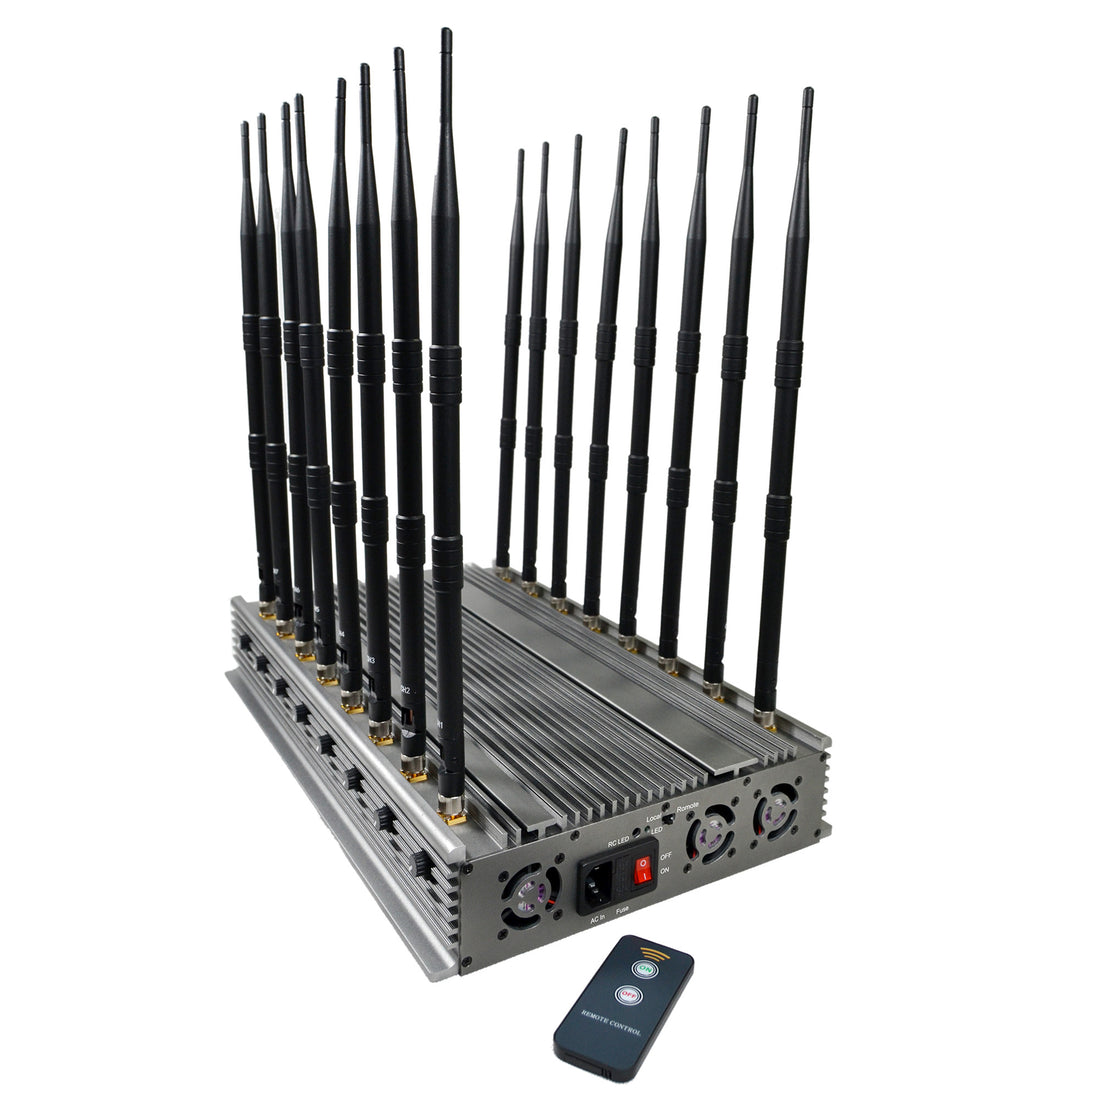 Shenzhen topsignaljammer Electronics Co., Ltd. teaches you how to choose a suitable mobile phone signal jammer